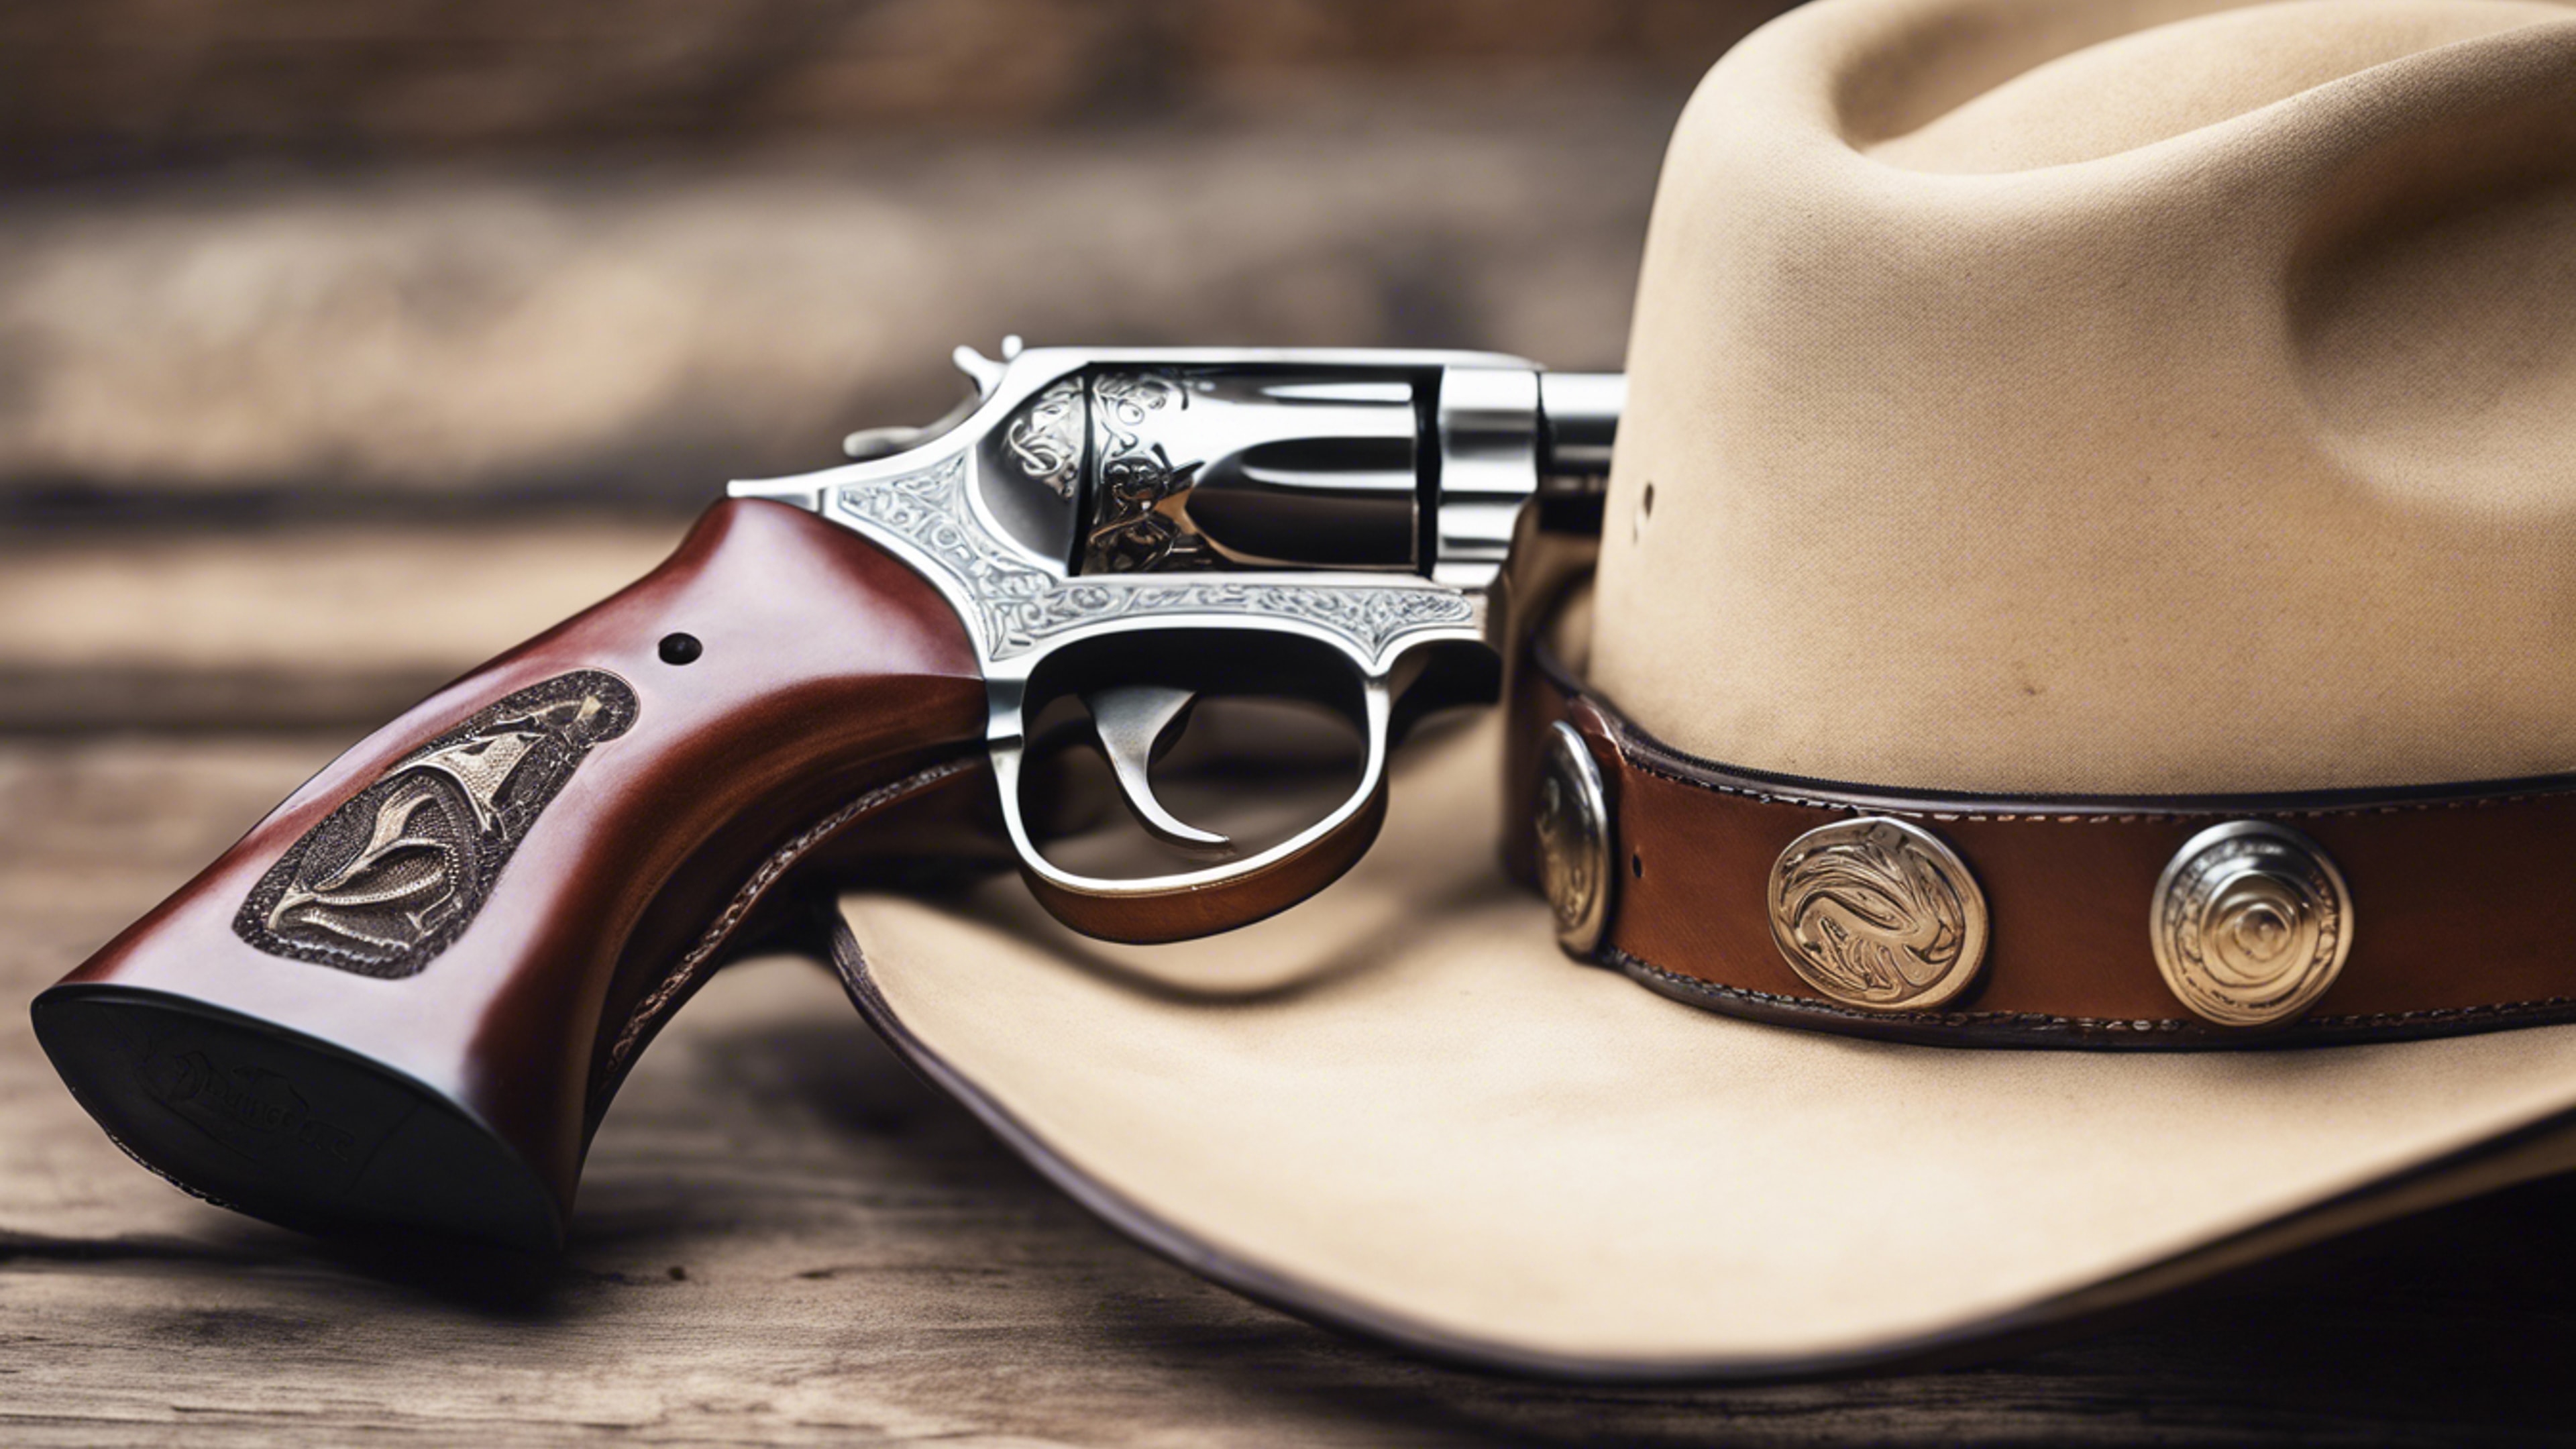 A detailed close-up of a cowboy hat, spurs, and a leather holster with a revolver.壁紙[6dbcb72083d24ad78673]